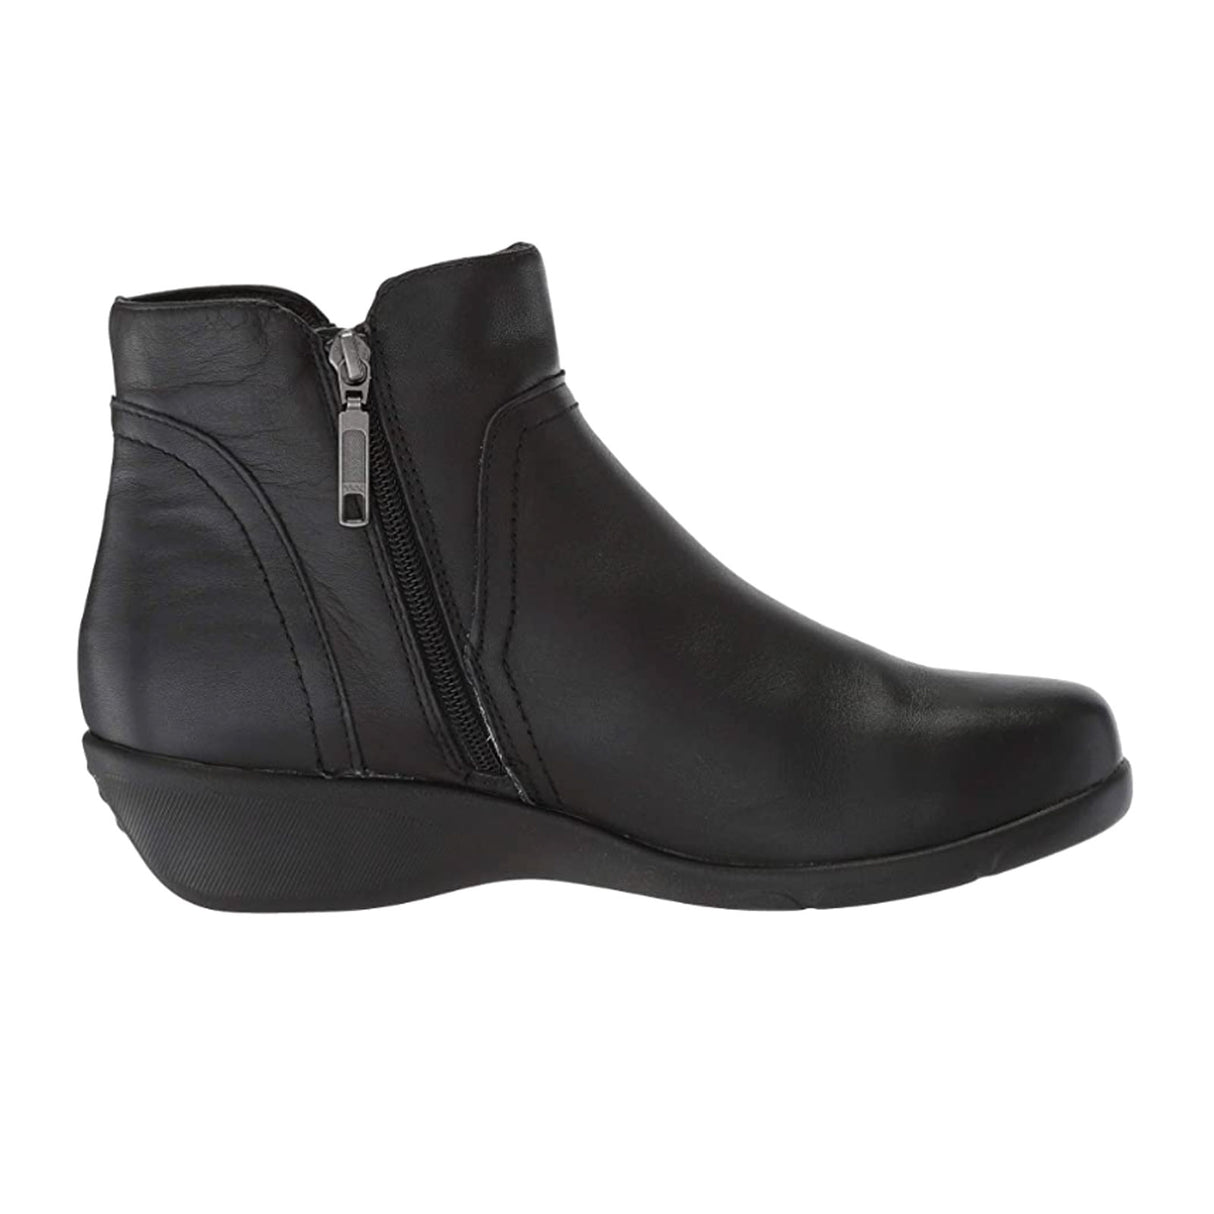 Propet Waverly Ankle Boot (Women) - Black Boots - Casual - Low - The Heel Shoe Fitters